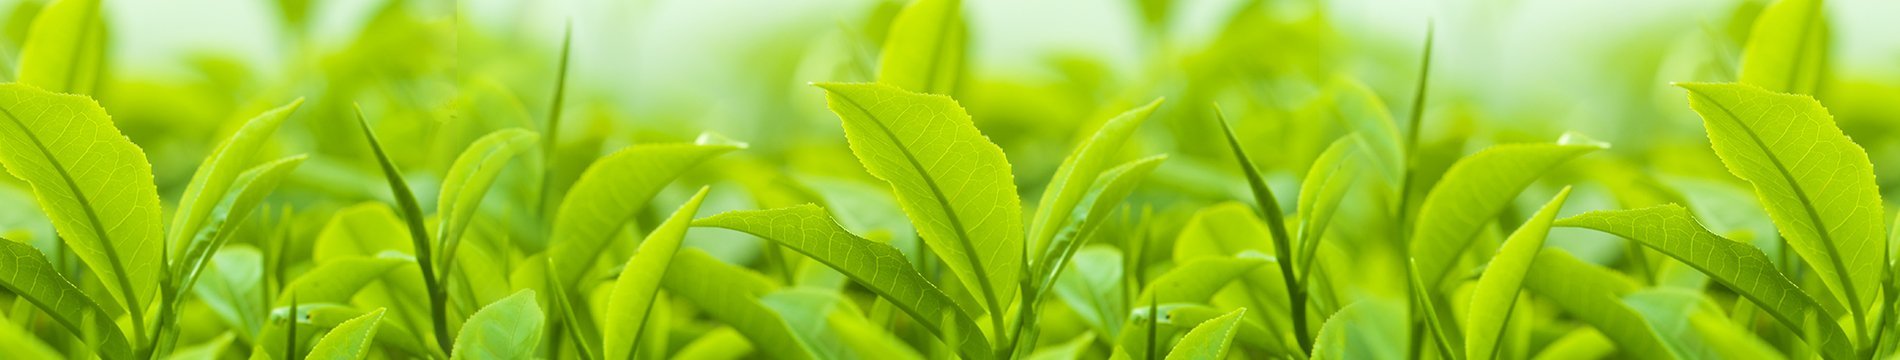 Tissu Mask ENG02 5 secrets about green tea you need to know and use on your facial skin